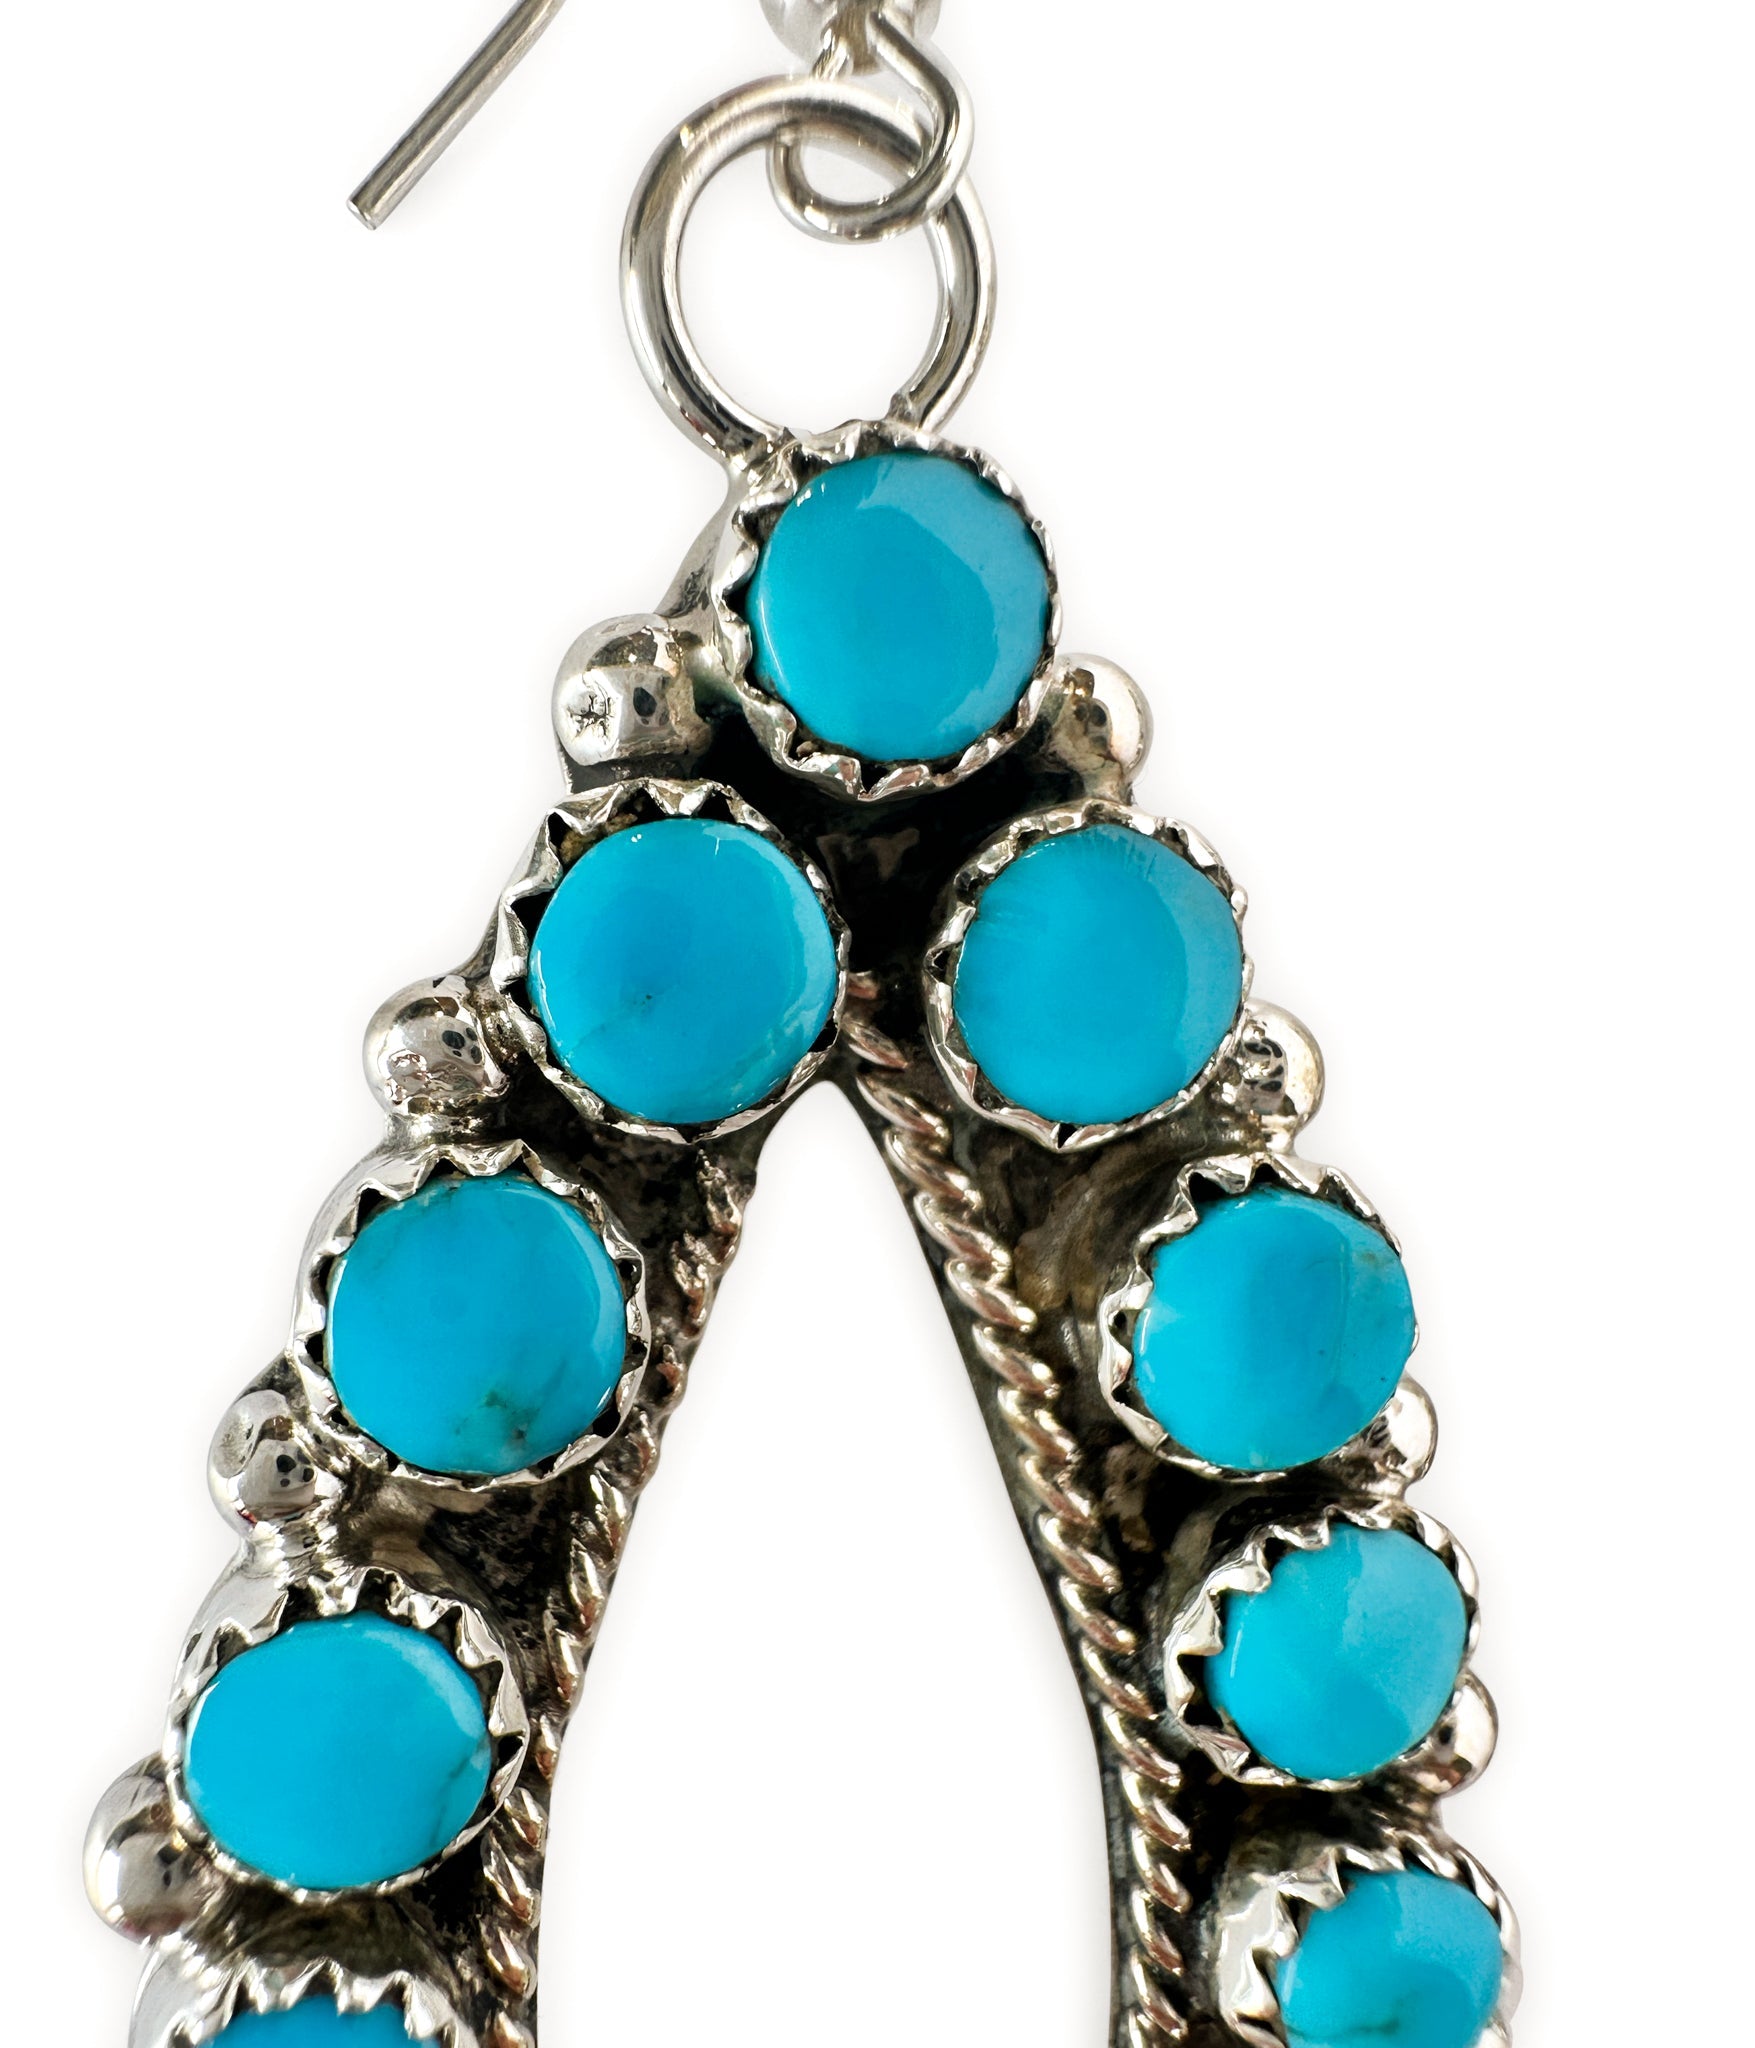 Maxwell Authentic Turquoise Earrings